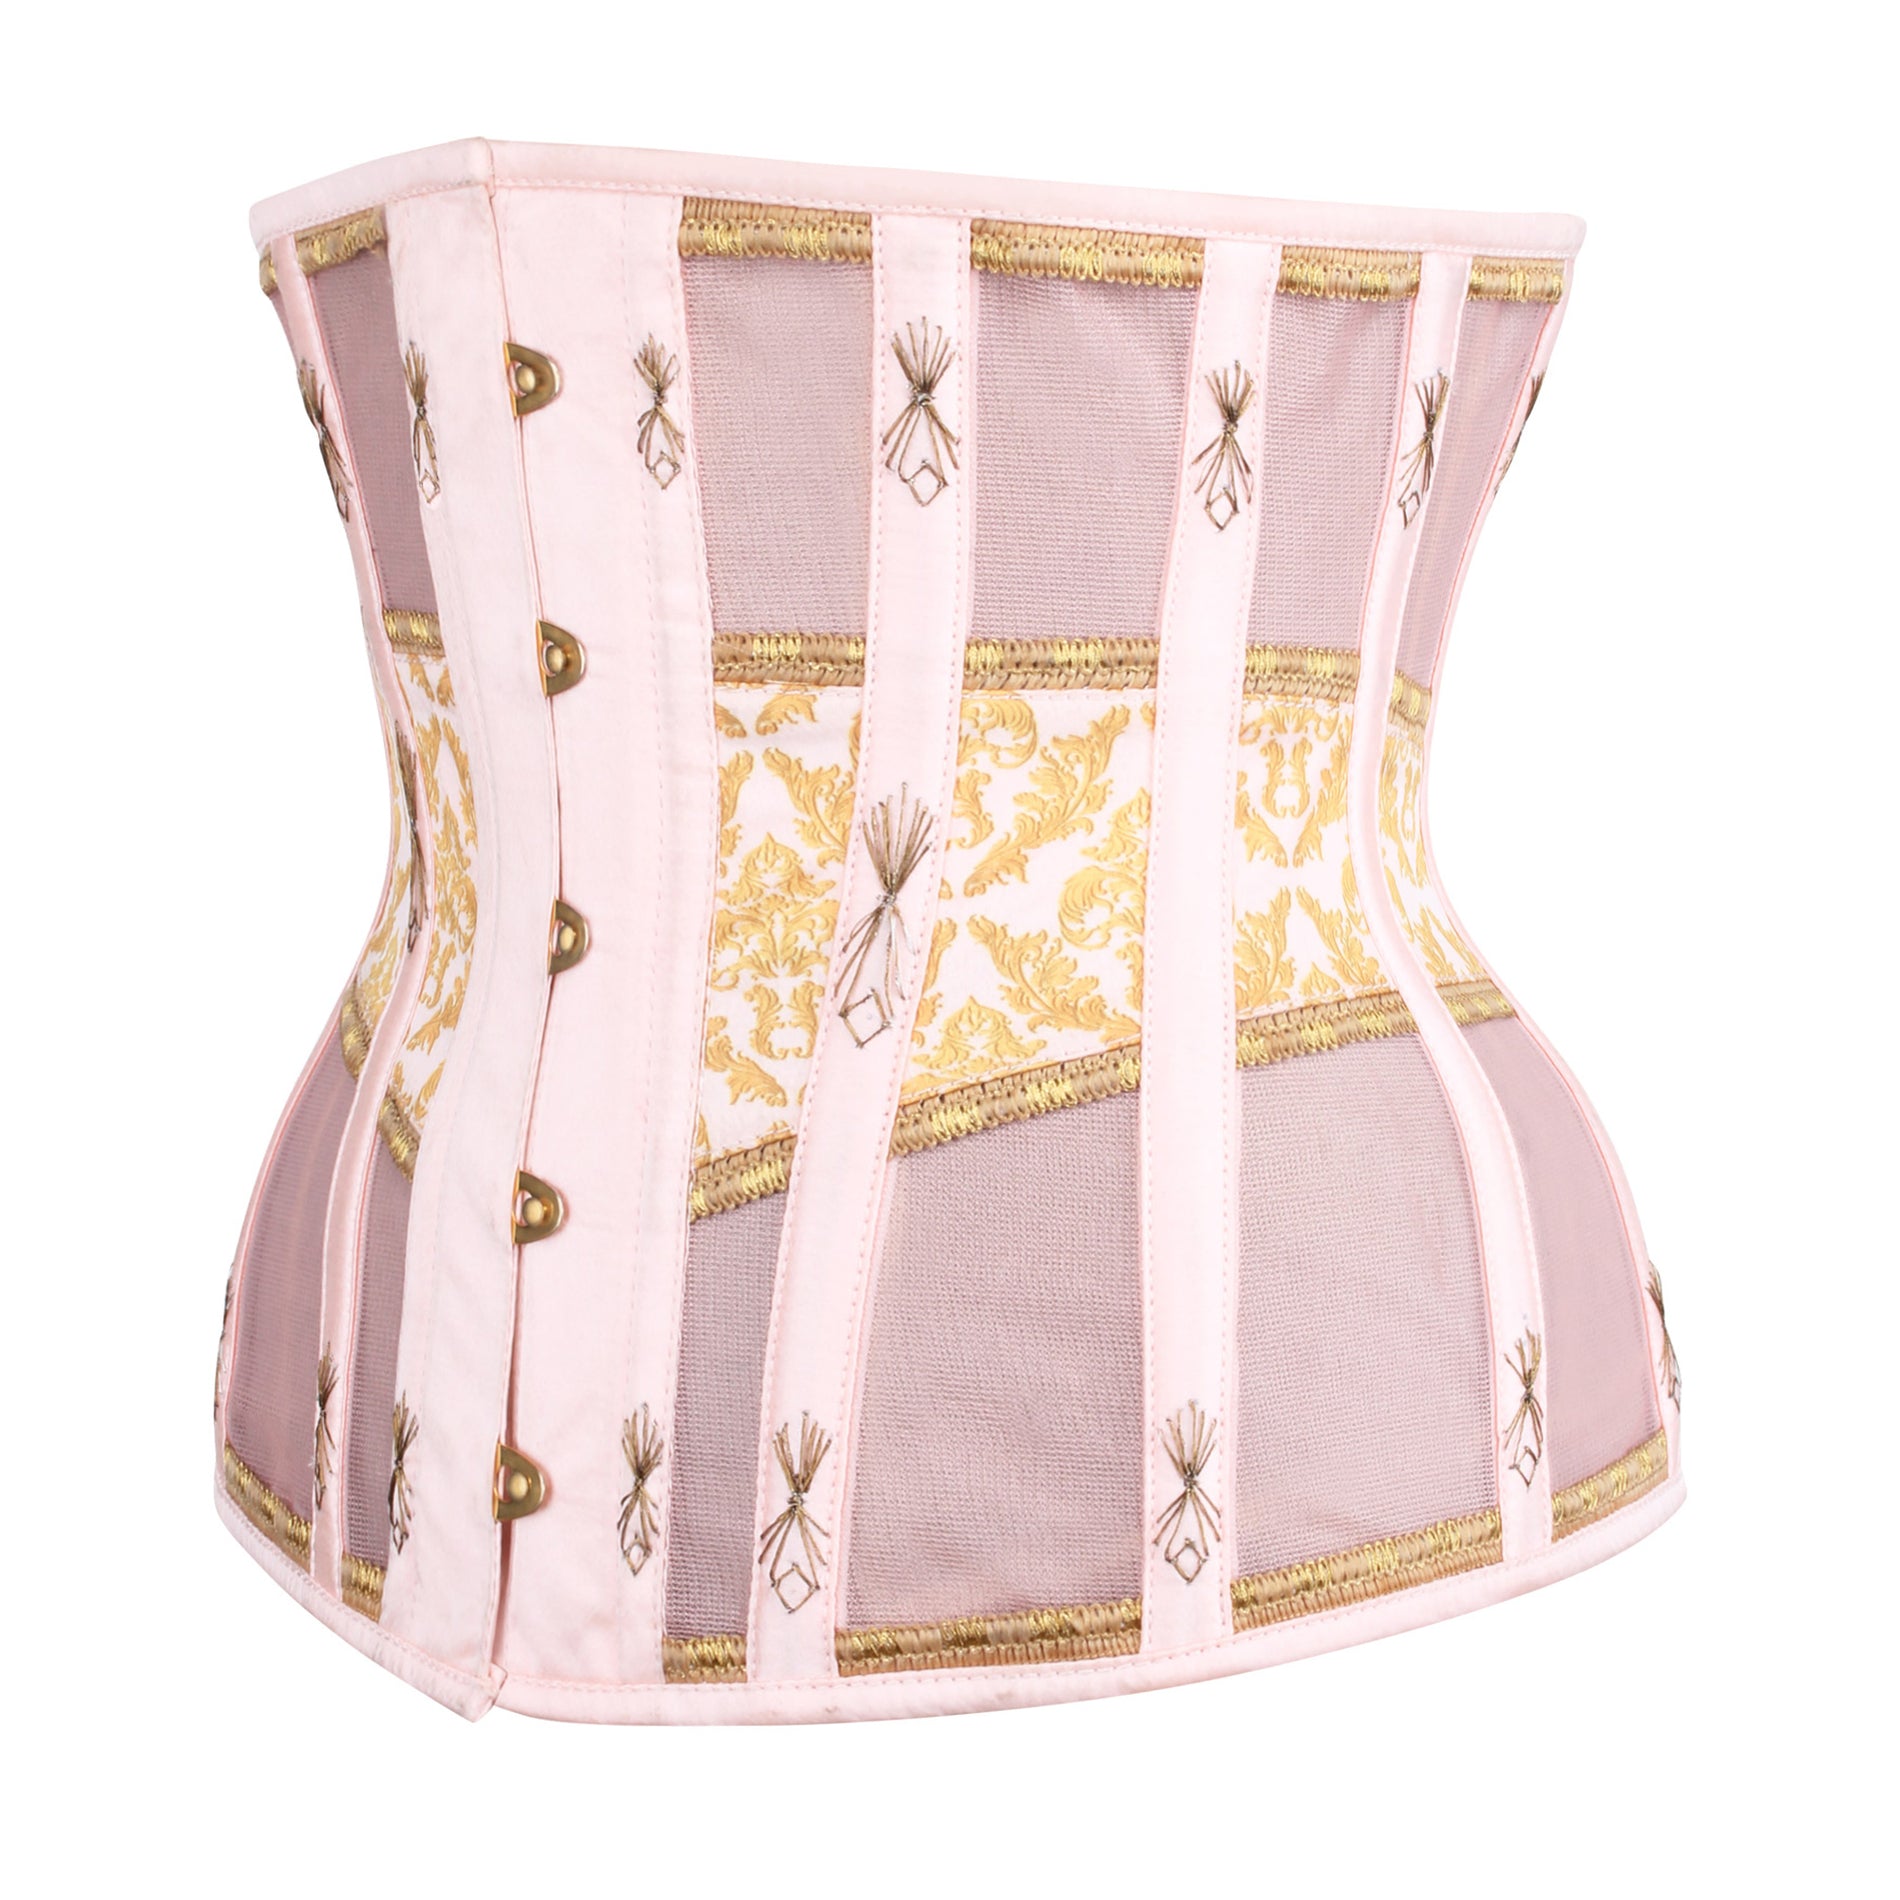 Quality Corsets: What Makes a Corset Authentic